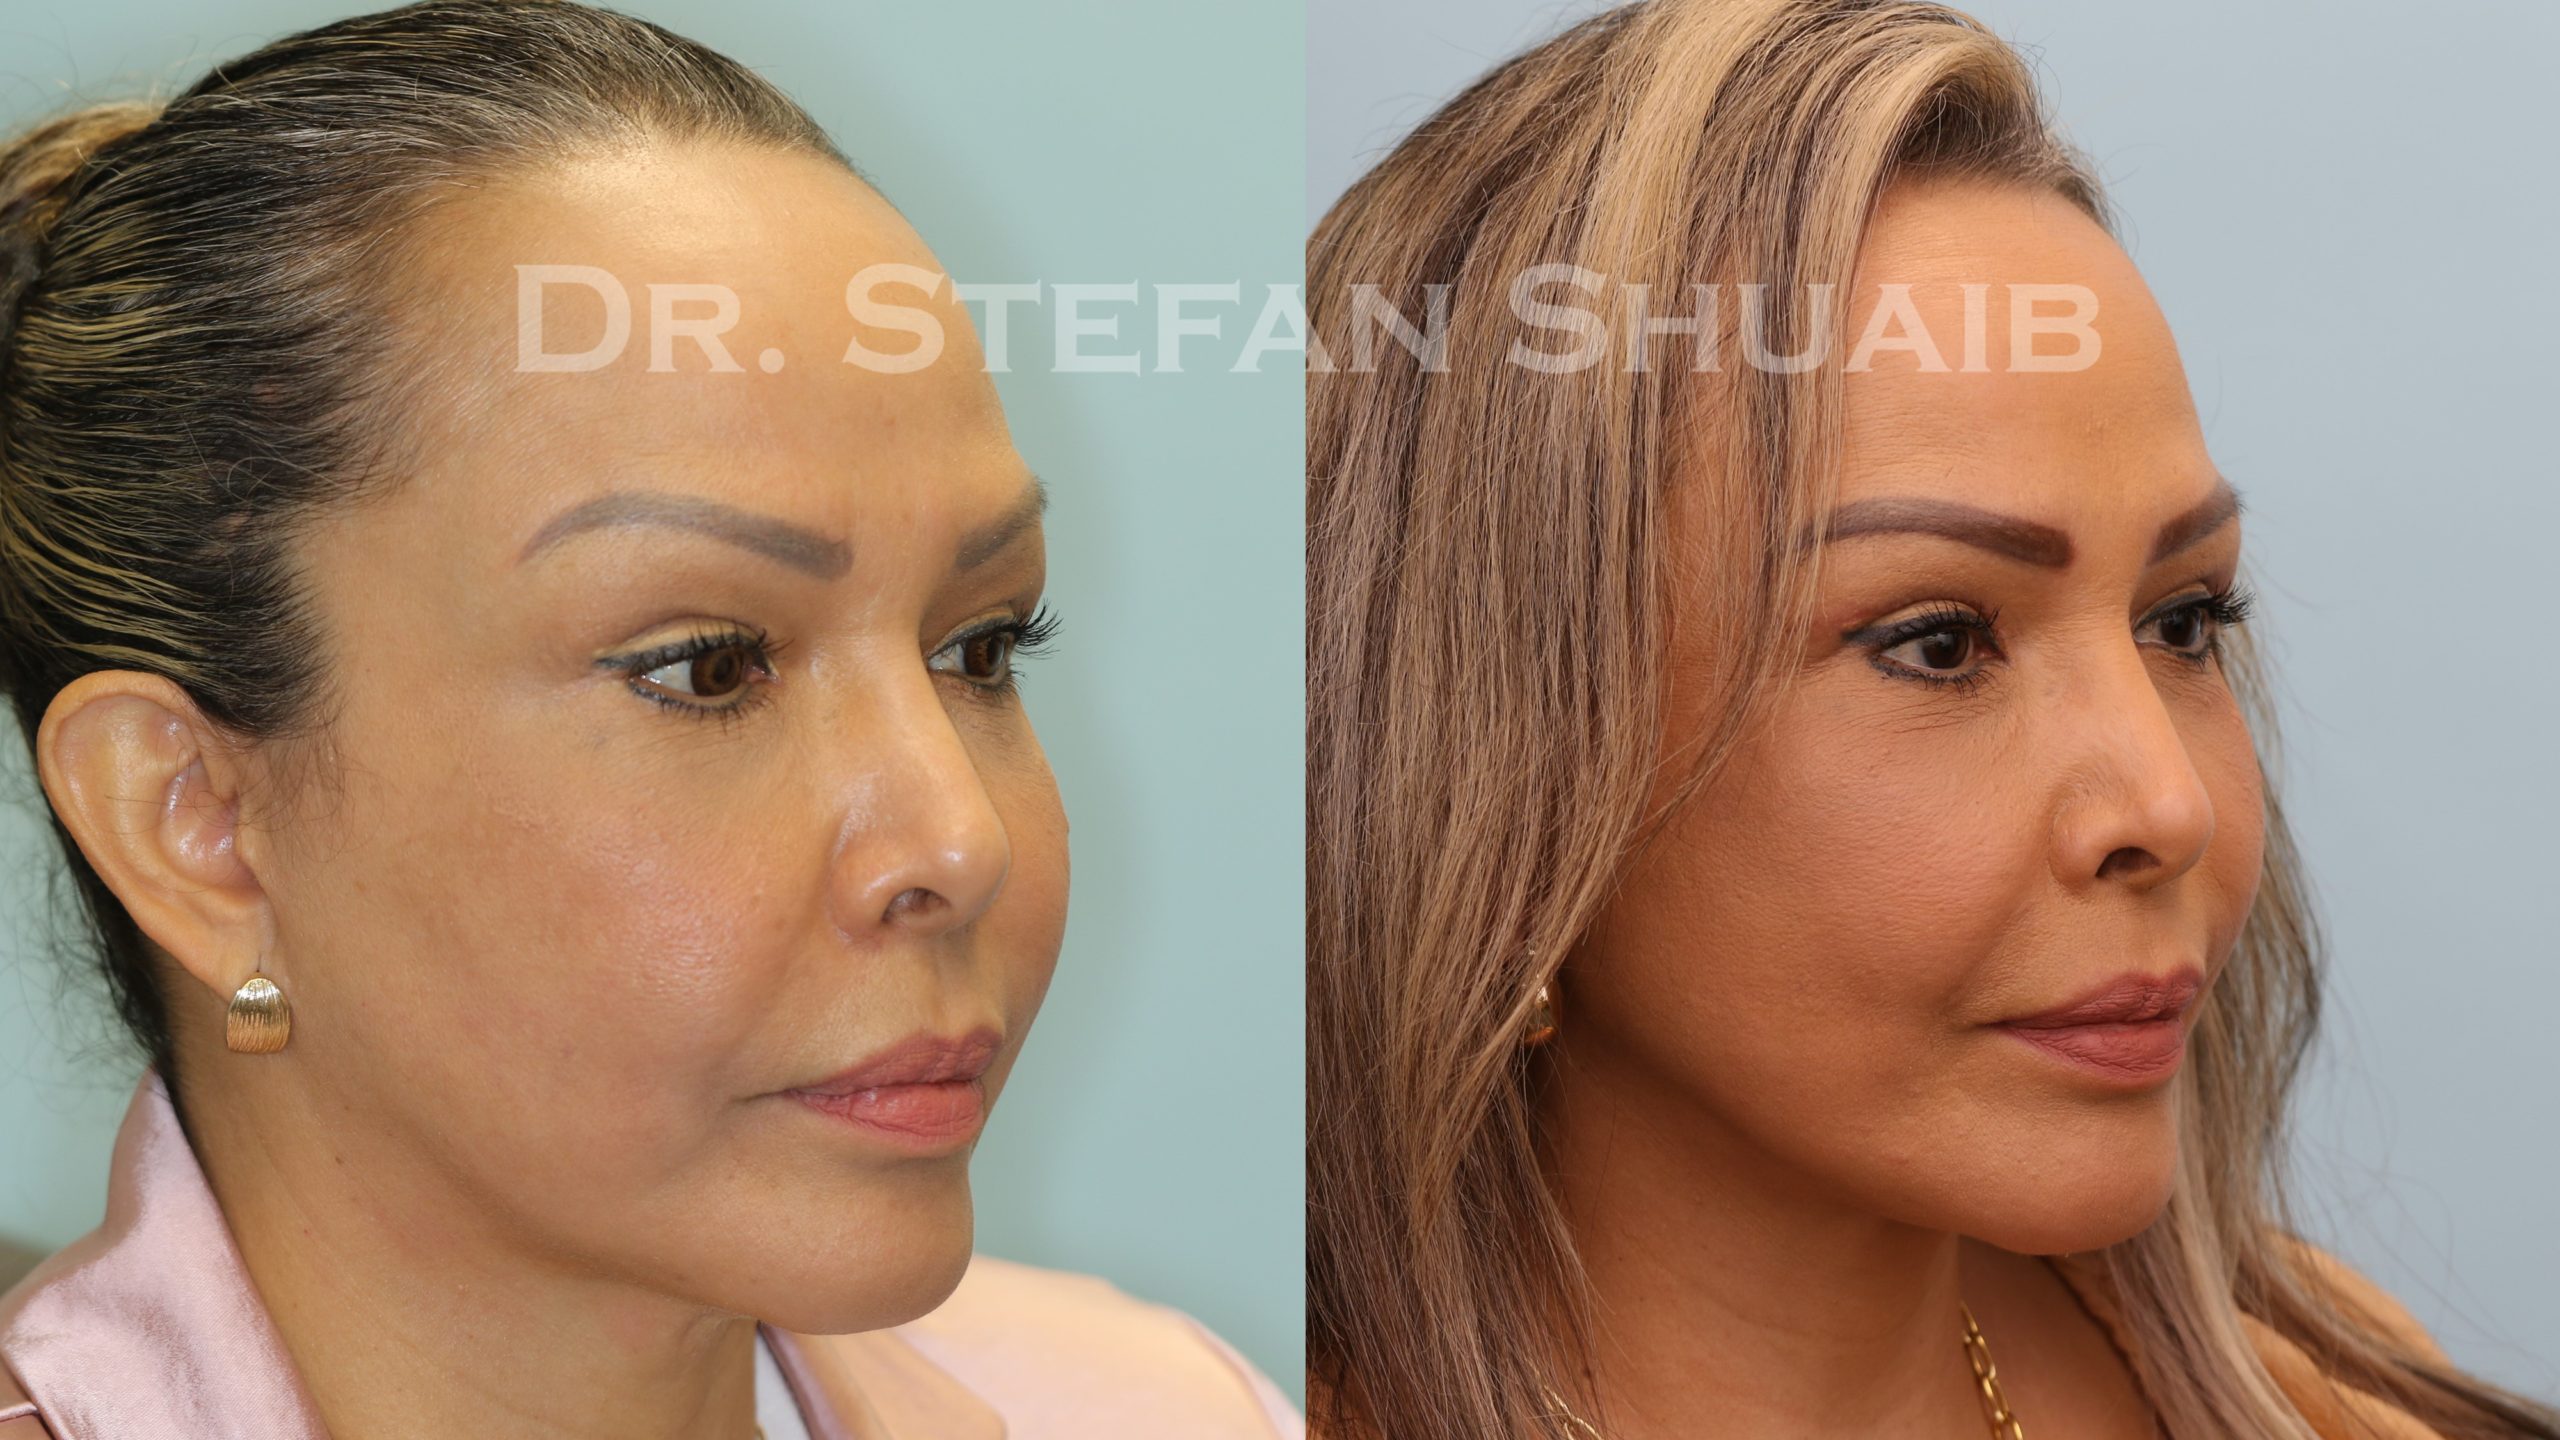 female patient before and after Facial Rejuvenation